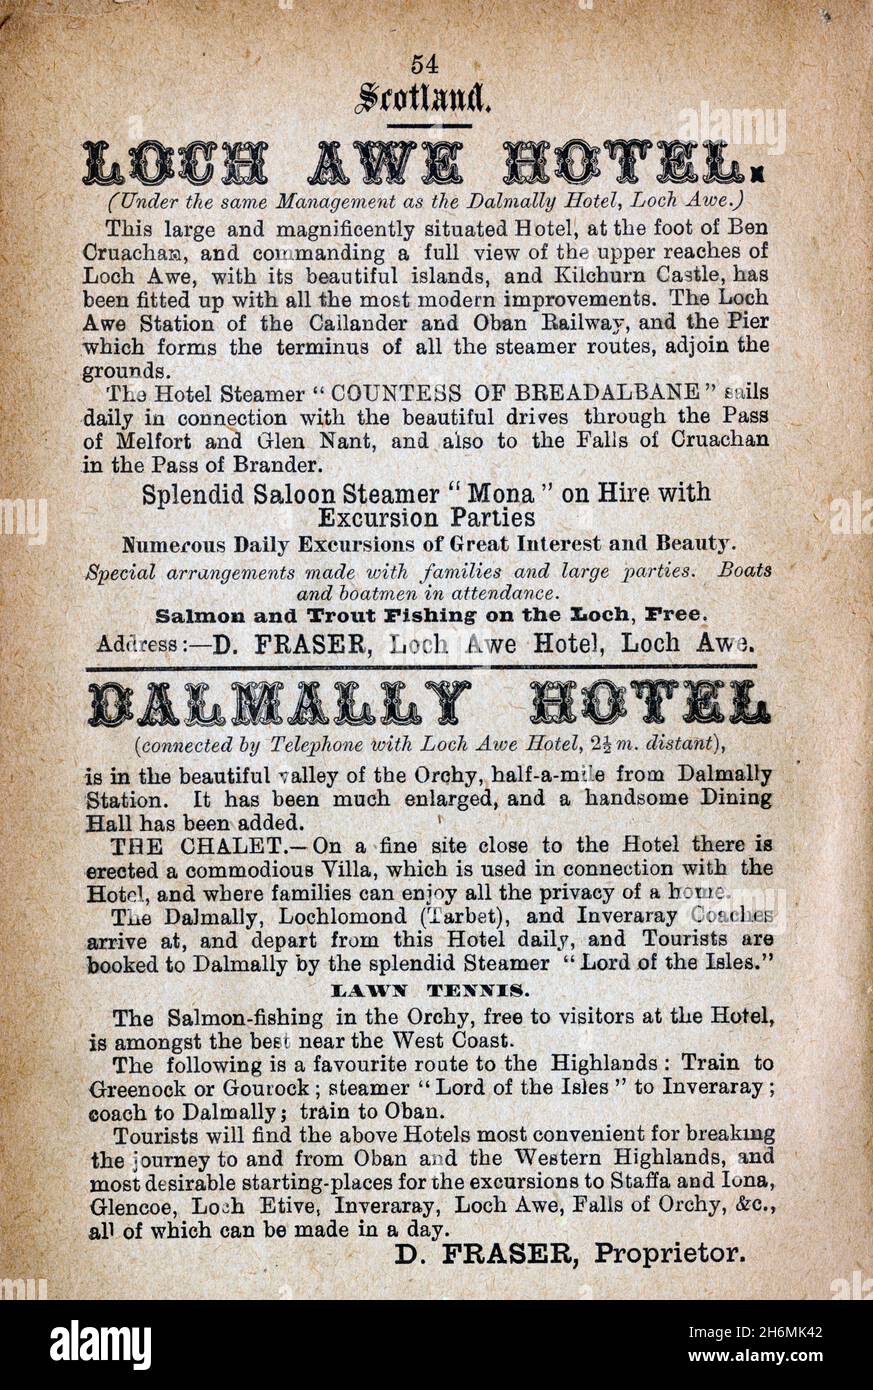 Vintage advertisement page from an 1889 Baddeley's Thorough Guide to the English Lake District.  Featuring hotels in Scotland, UK. Stock Photo